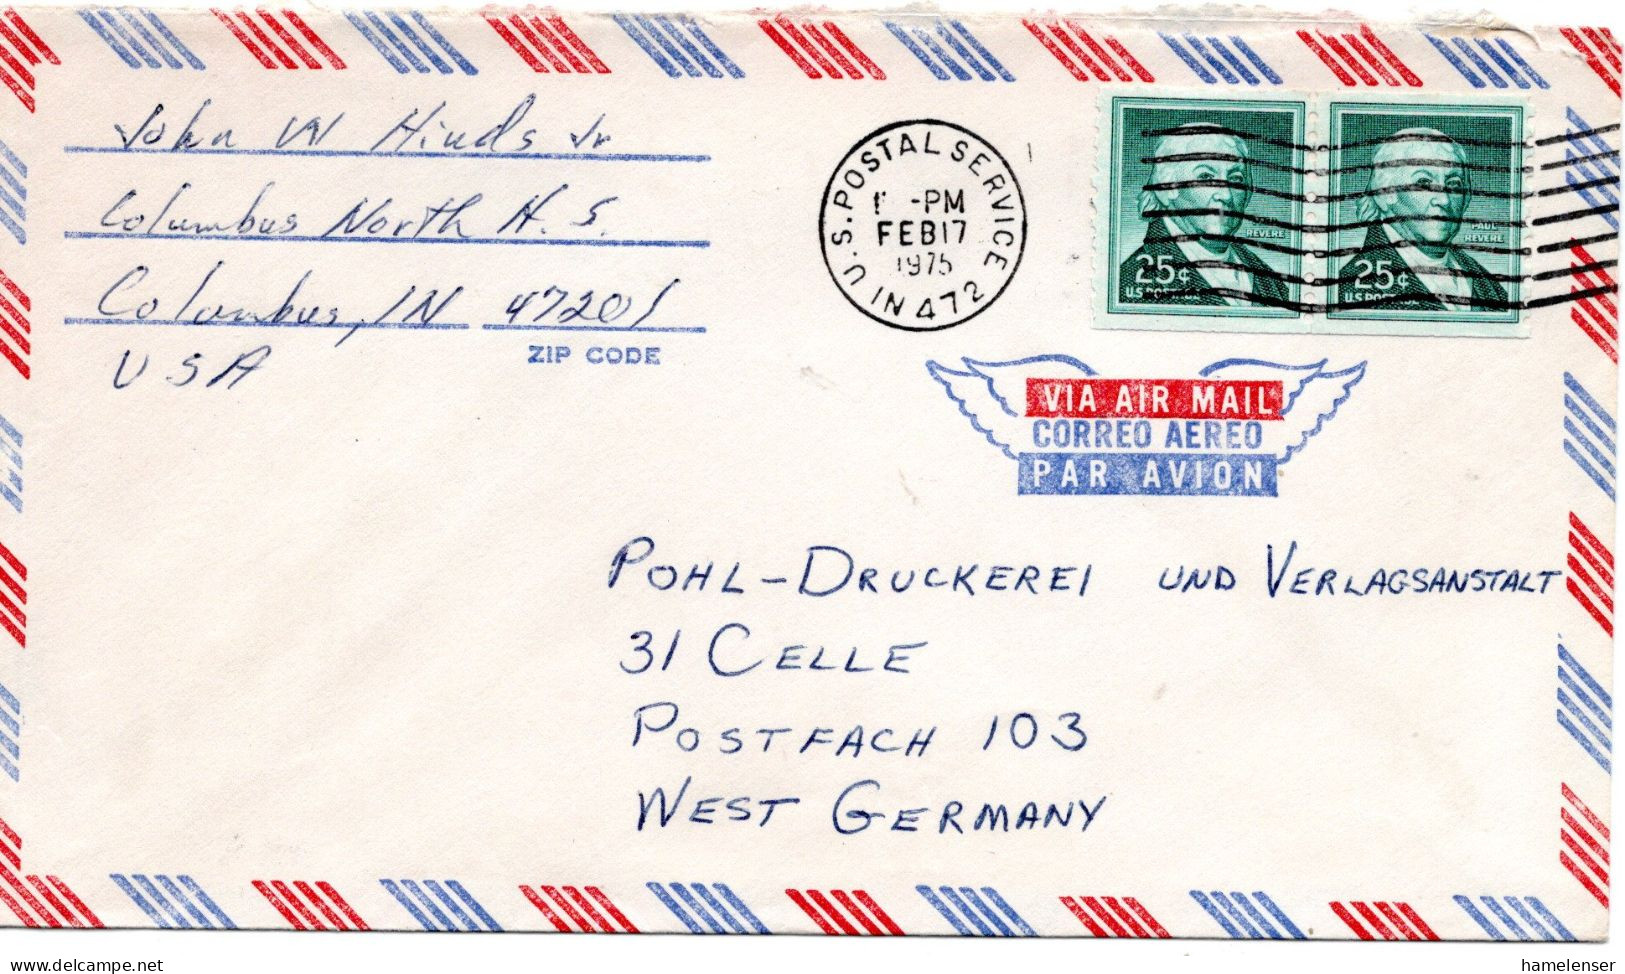 75199 - USA - 1975 - 2@25¢ Revere (Rolle) A LpBf U.S.POSTAL SERVICE IN 472 -> Westdeutschland - Lettres & Documents